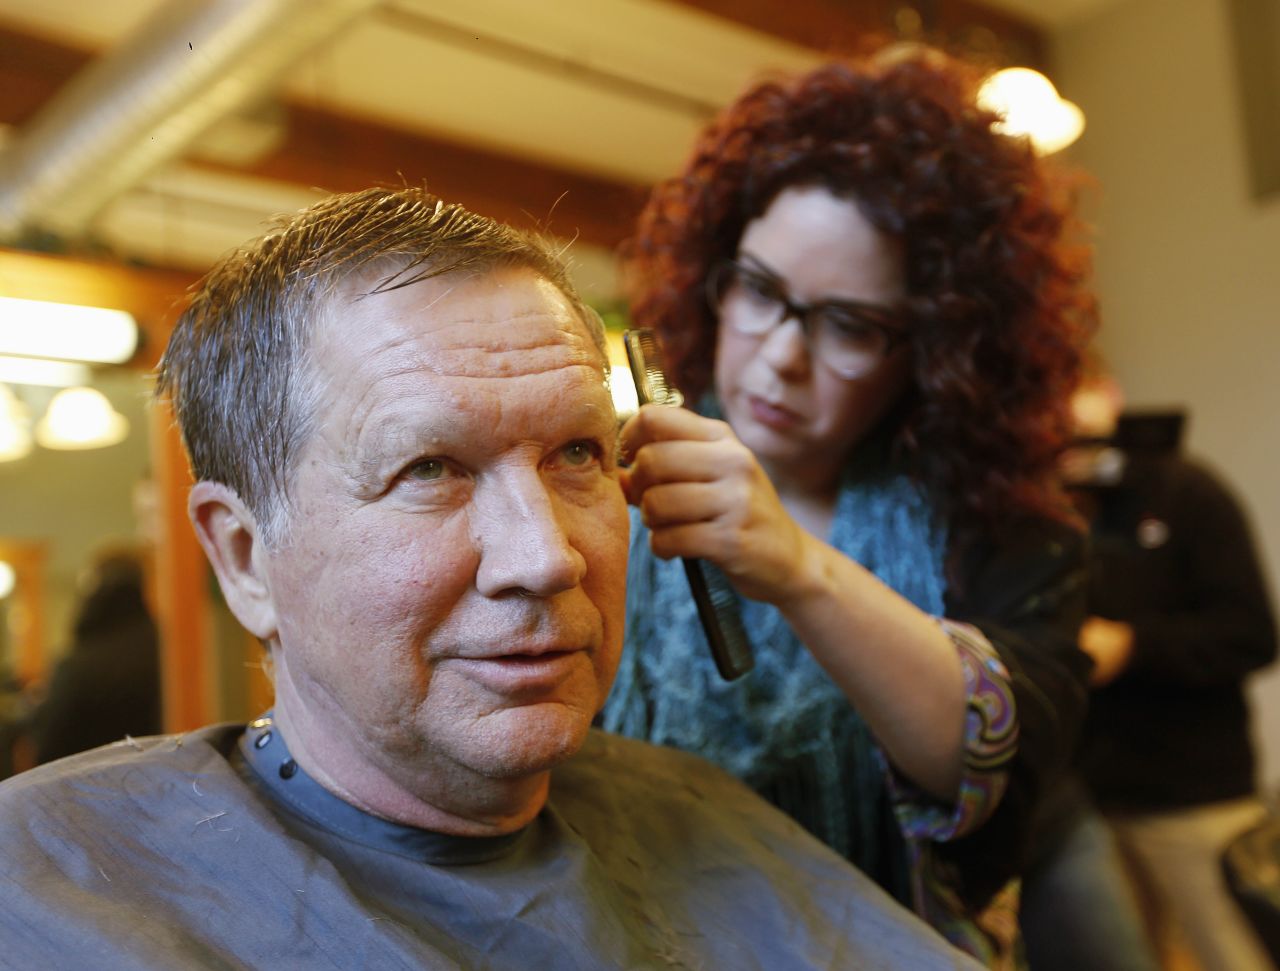 Ohio Gov. John Kasich, a Republican presidential candidate, has his hair cut in Manchester, New Hampshire, on Monday, January 25.